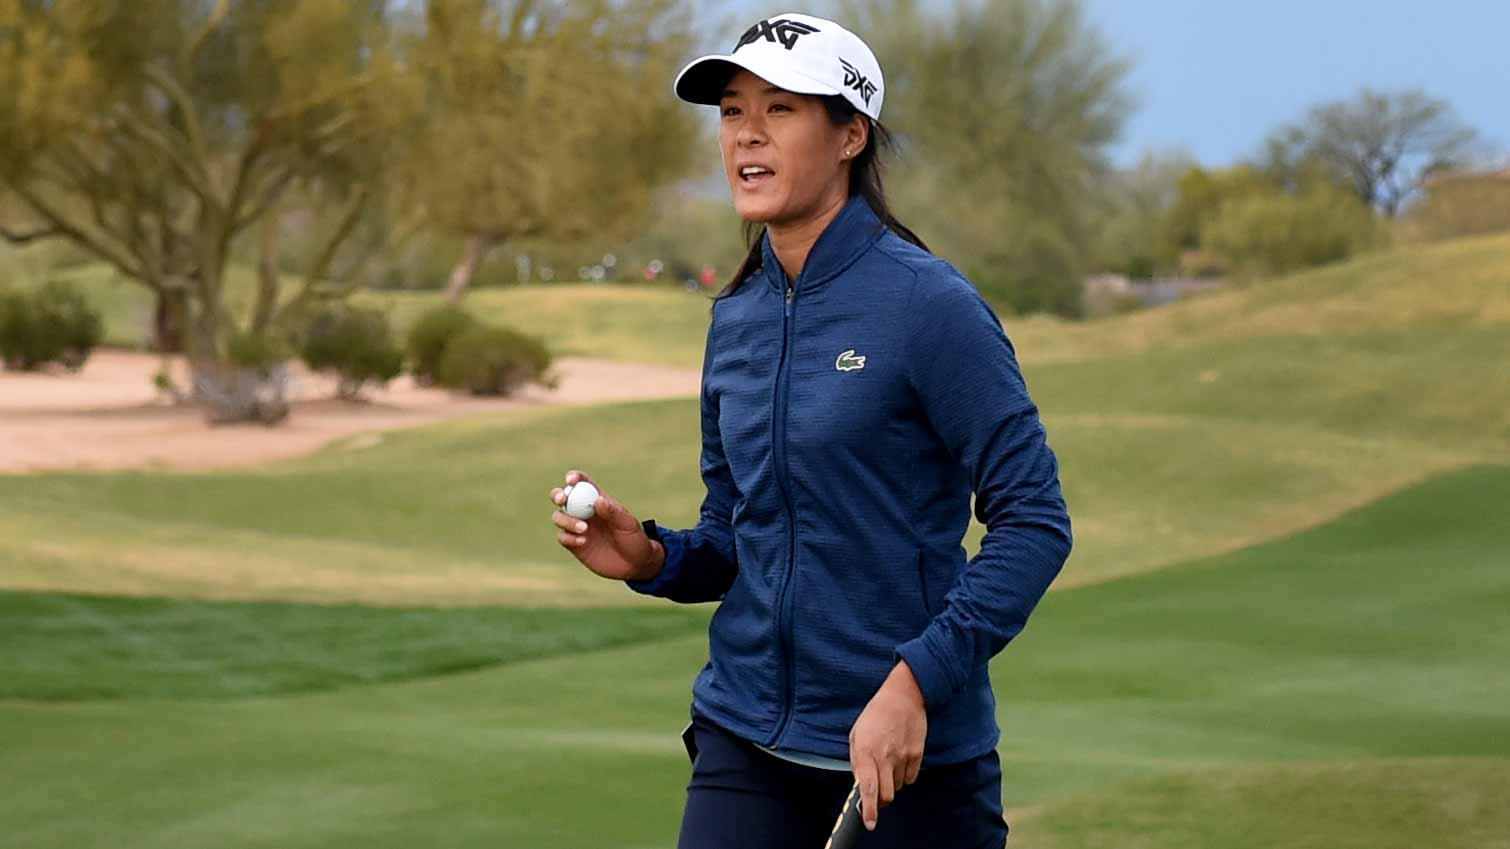 Celine Boutier of France reacts after sinking a putt on the ninth hole to take the lead during the first round of the Bank of Hope Founders Cup at the Wildfire Golf Club on March 21, 2019 in Phoenix, Arizon